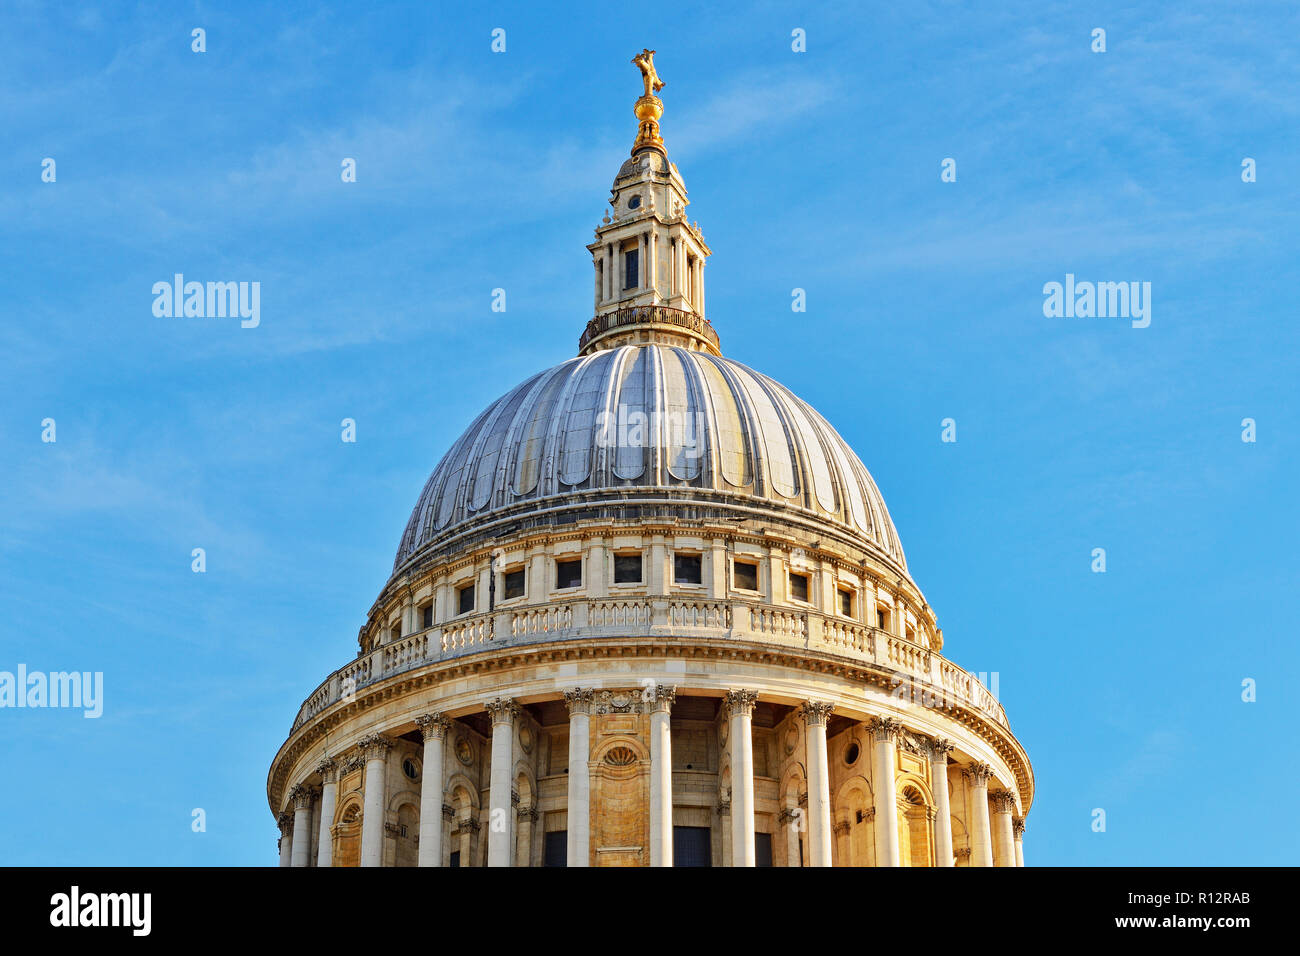 St Pauls Cathedral Dome, London, England, United Kingdom Stock Photo